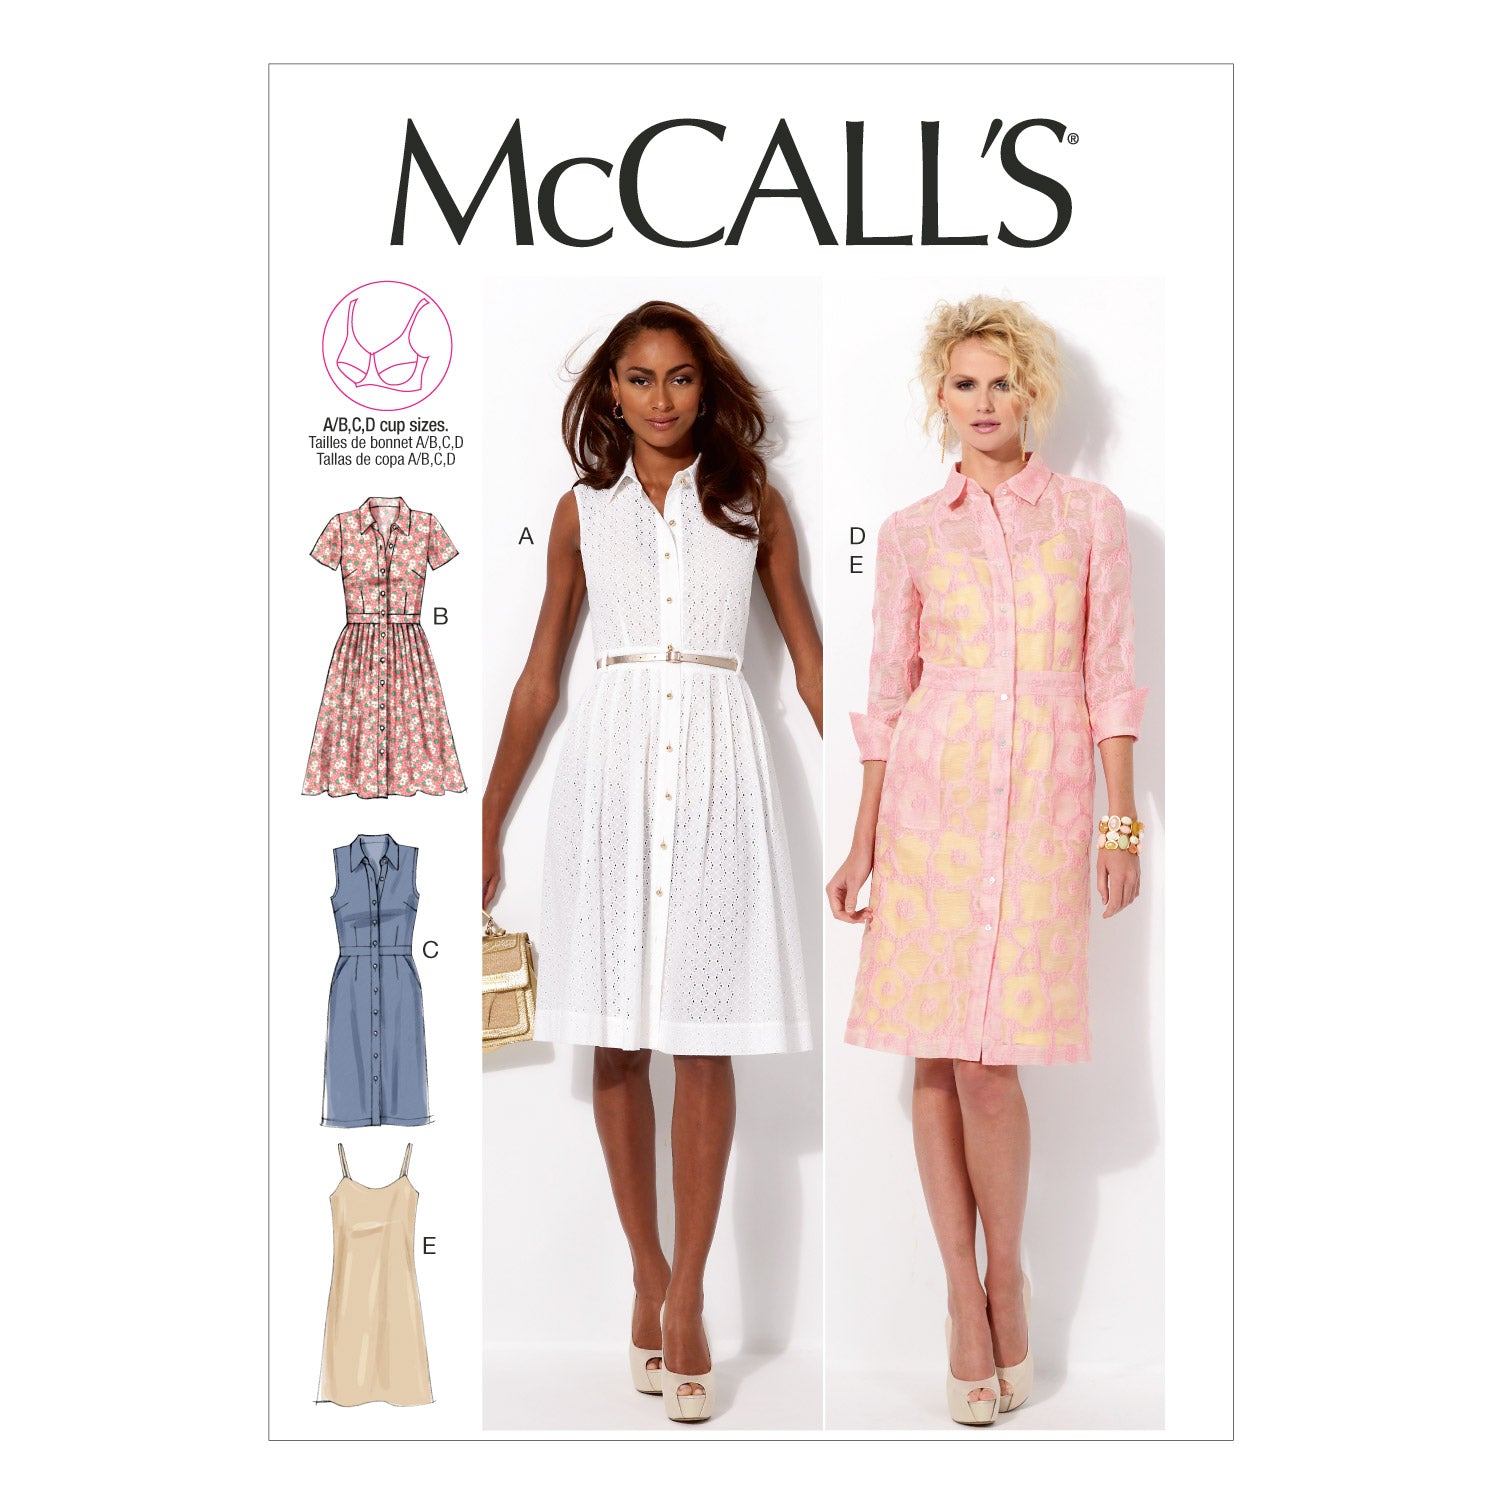 McCall's 6696 Misses' Dresses and Slip Pattern from Jaycotts Sewing Supplies